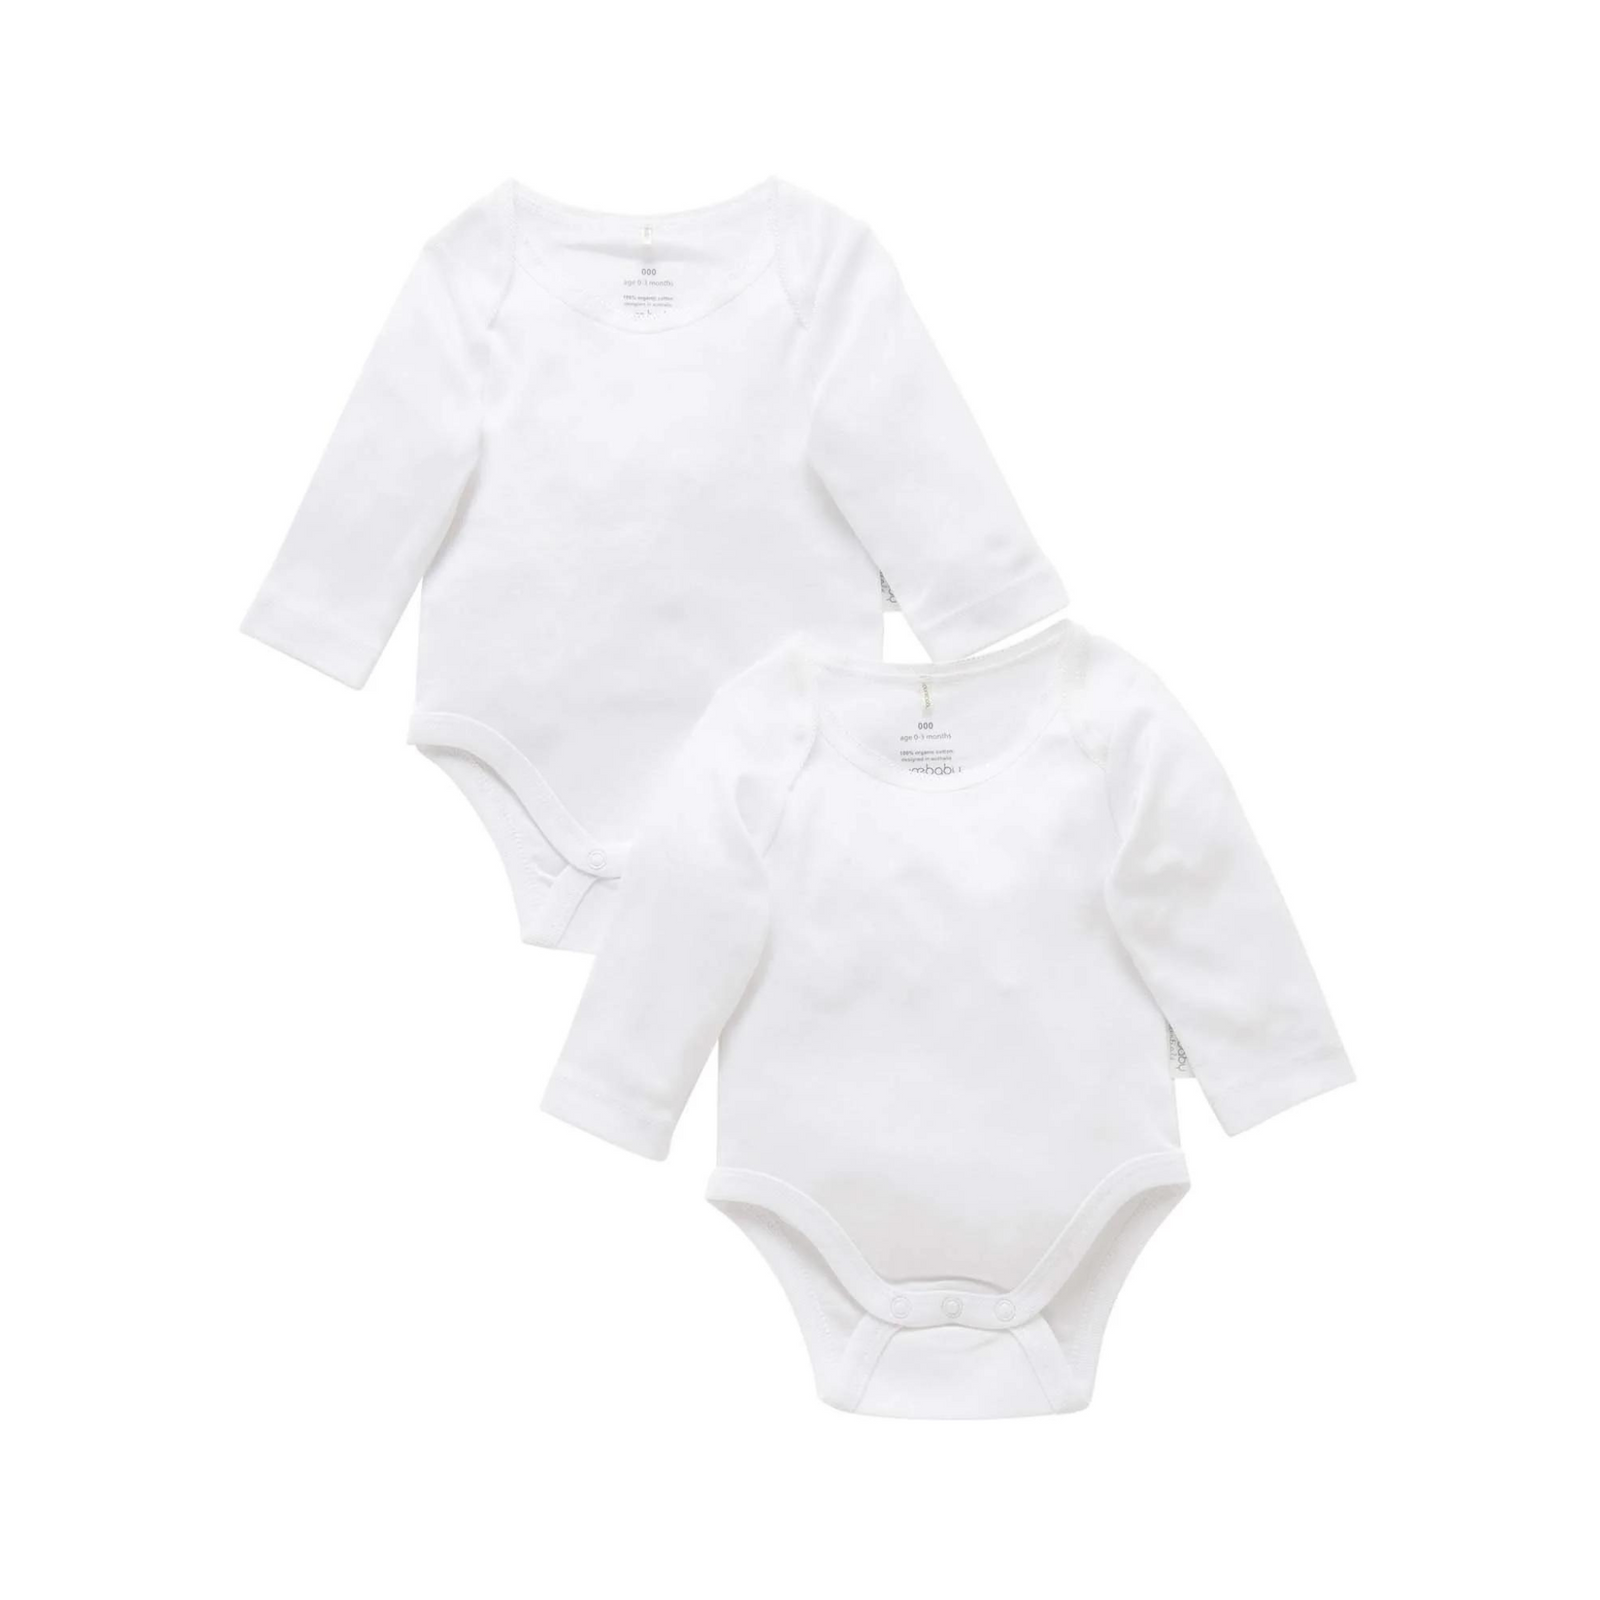 Purebaby Pointelle Tee - Mother Of Pearl - Canterbury Kids